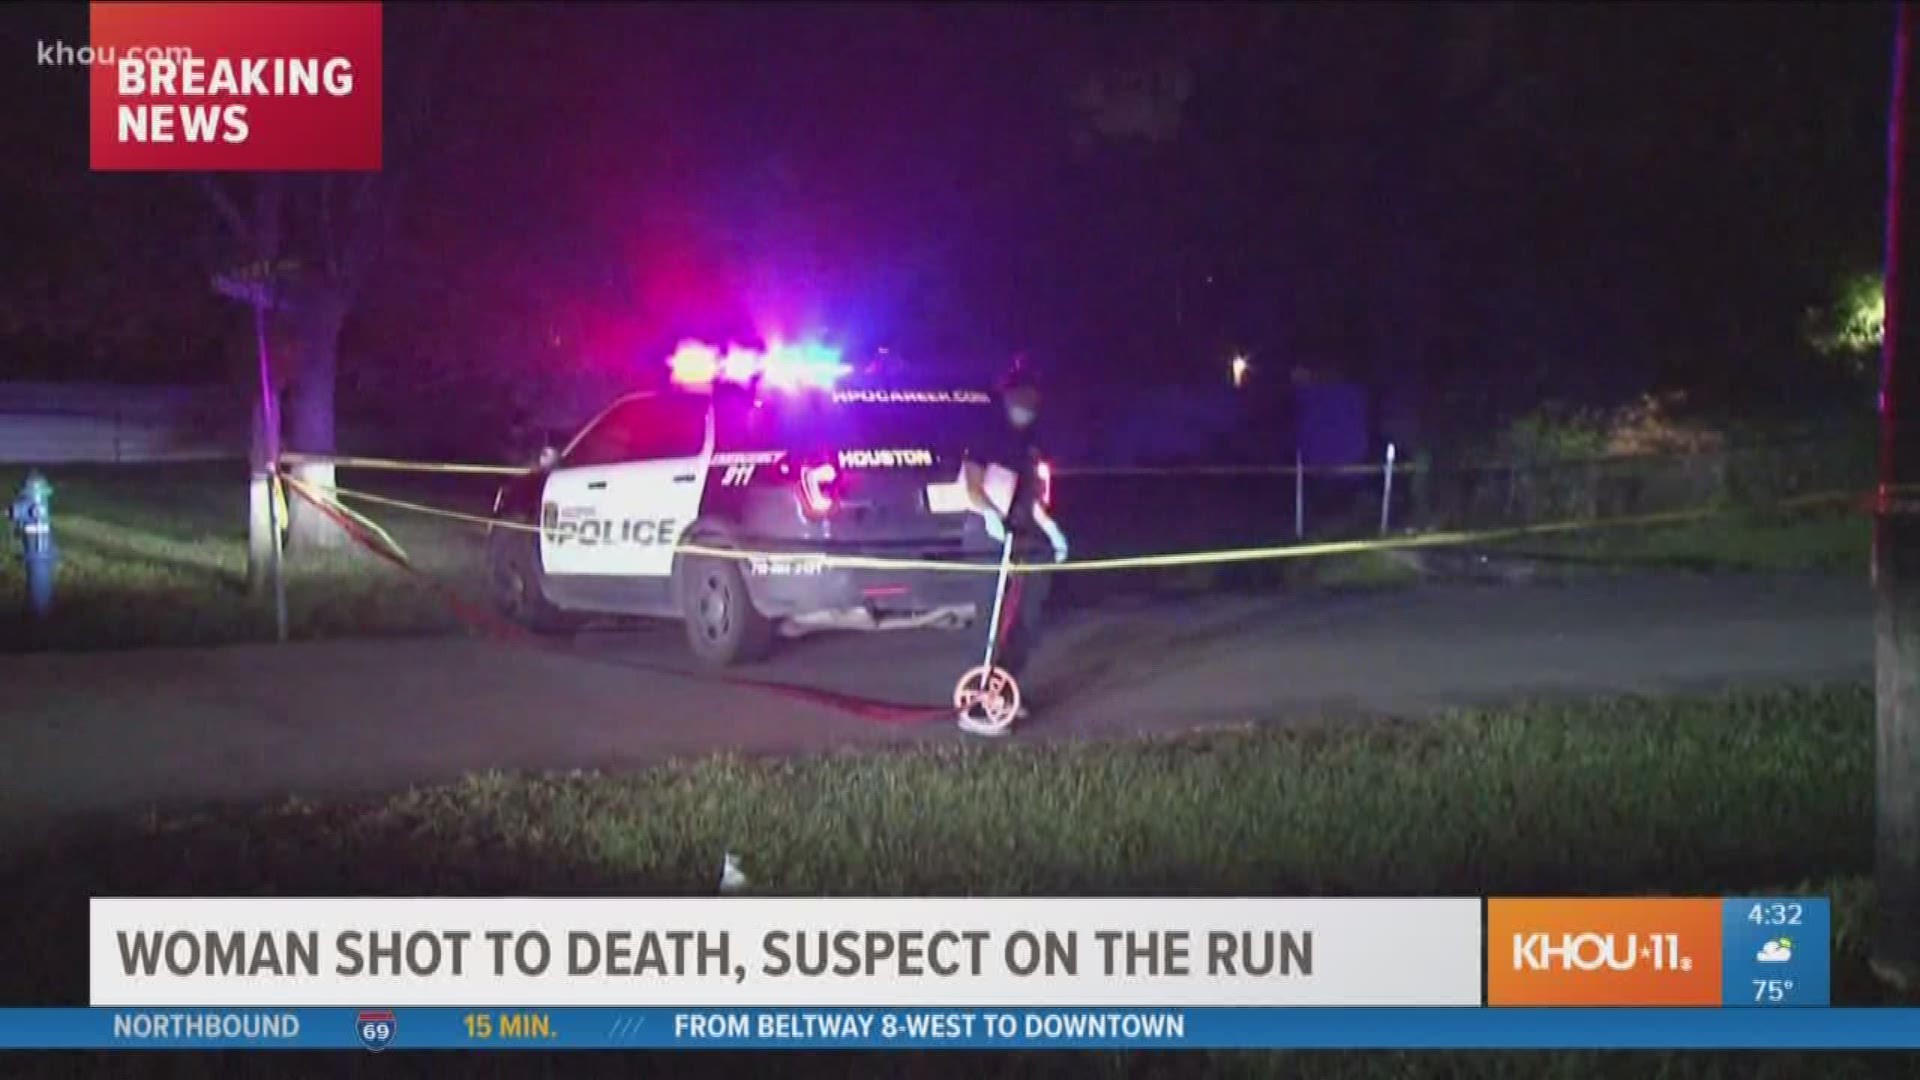 Police are investigating homicide after a woman was shot dead in the street in northeast Houston late Sunday.